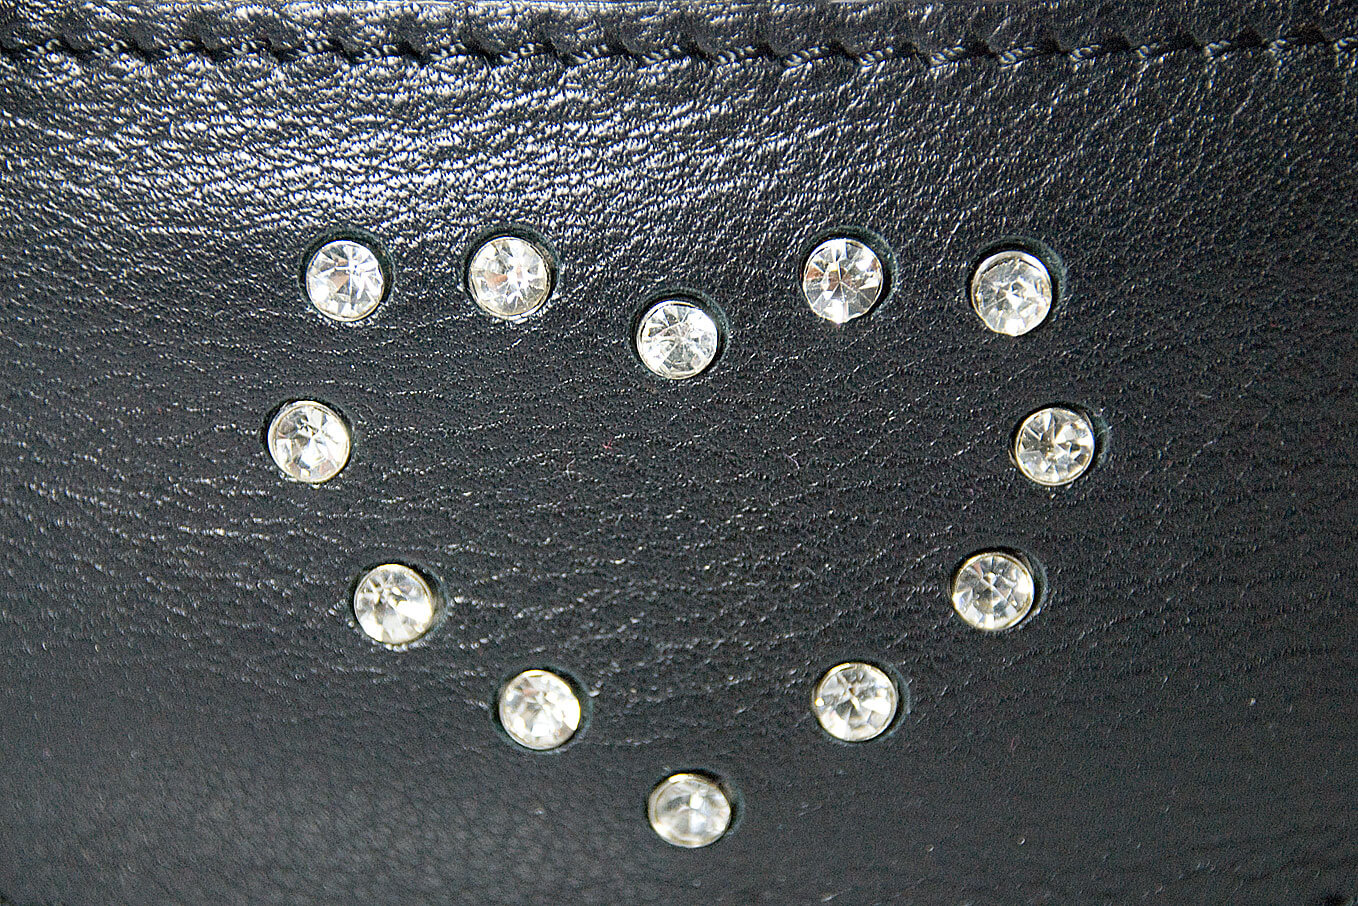 Quality crystal studs in a hearts shape